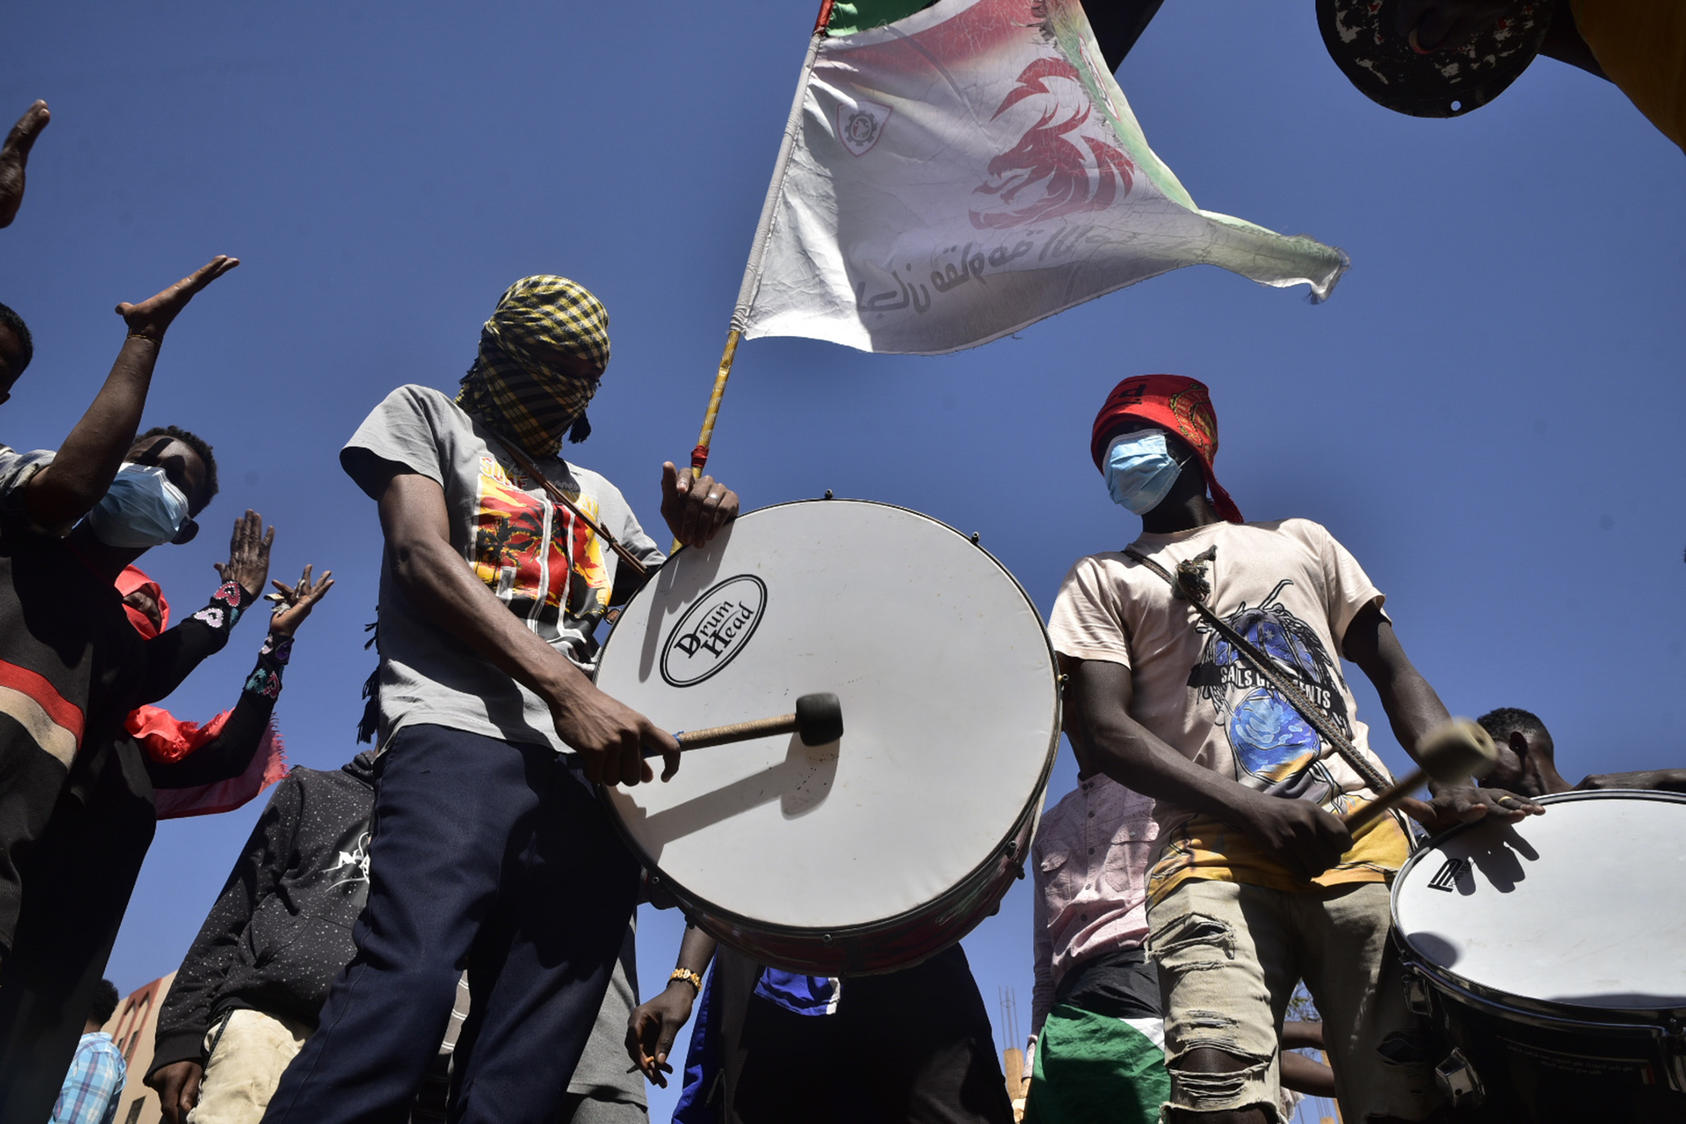 Sudanese youth rally last month in one of many protests, by tens of thousands of people, since October against Sudan’s army coup. Troops have quelled rallies by force, killing participants. (Faiz Abubakar Muhamed/The New York Times)